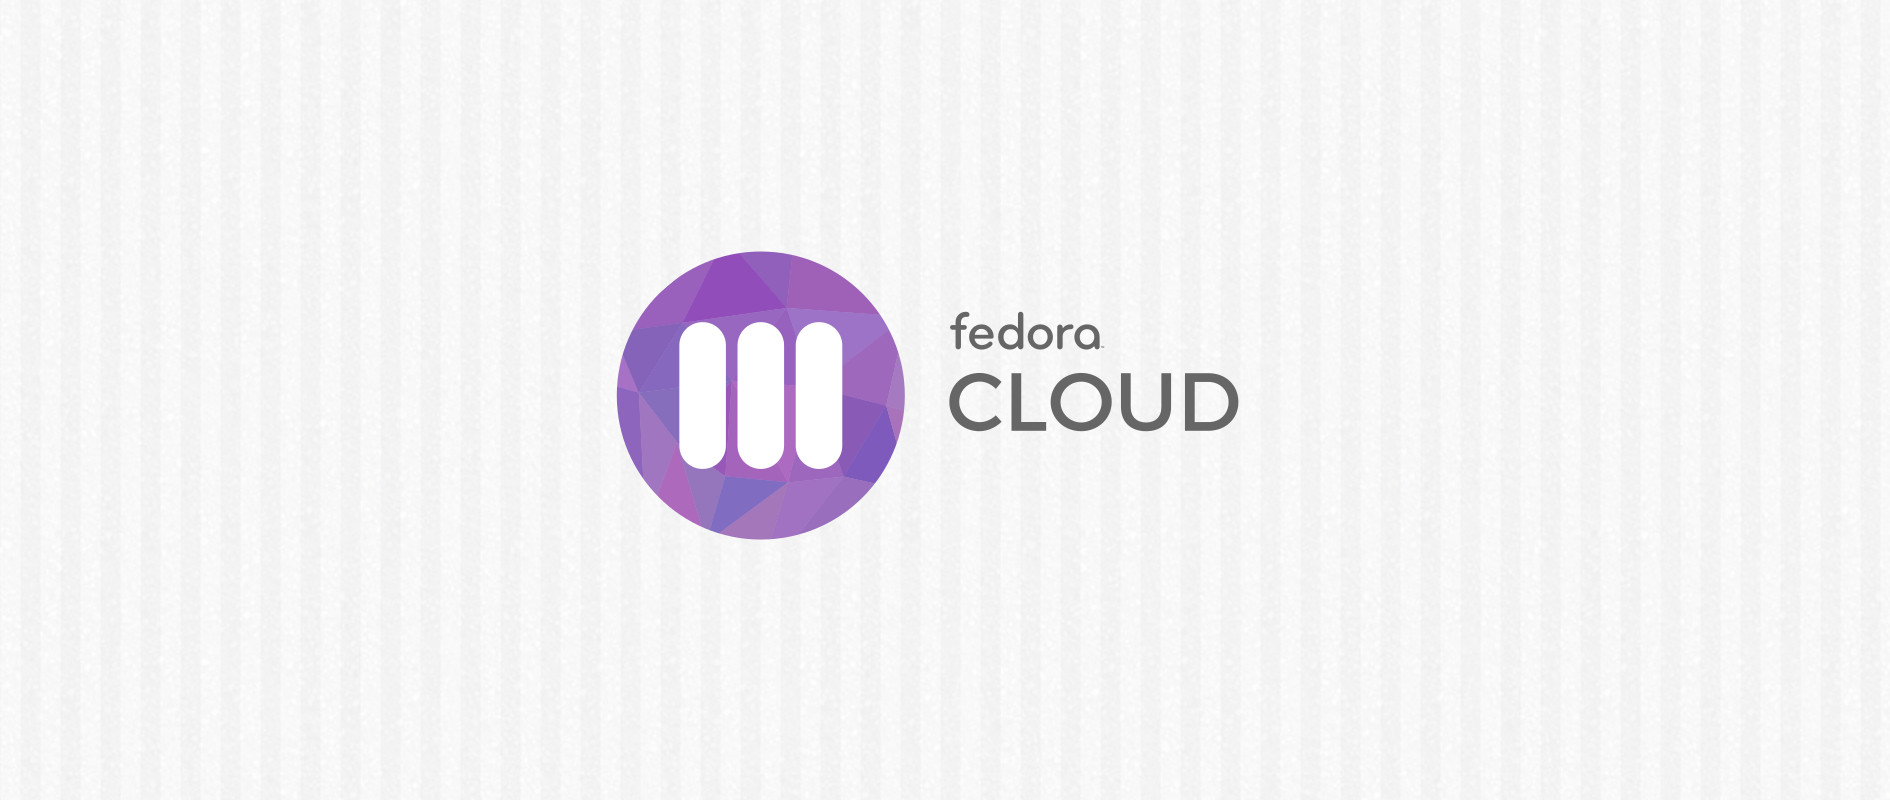 git commit -m "Fedora Cloud Base Image has a new home!